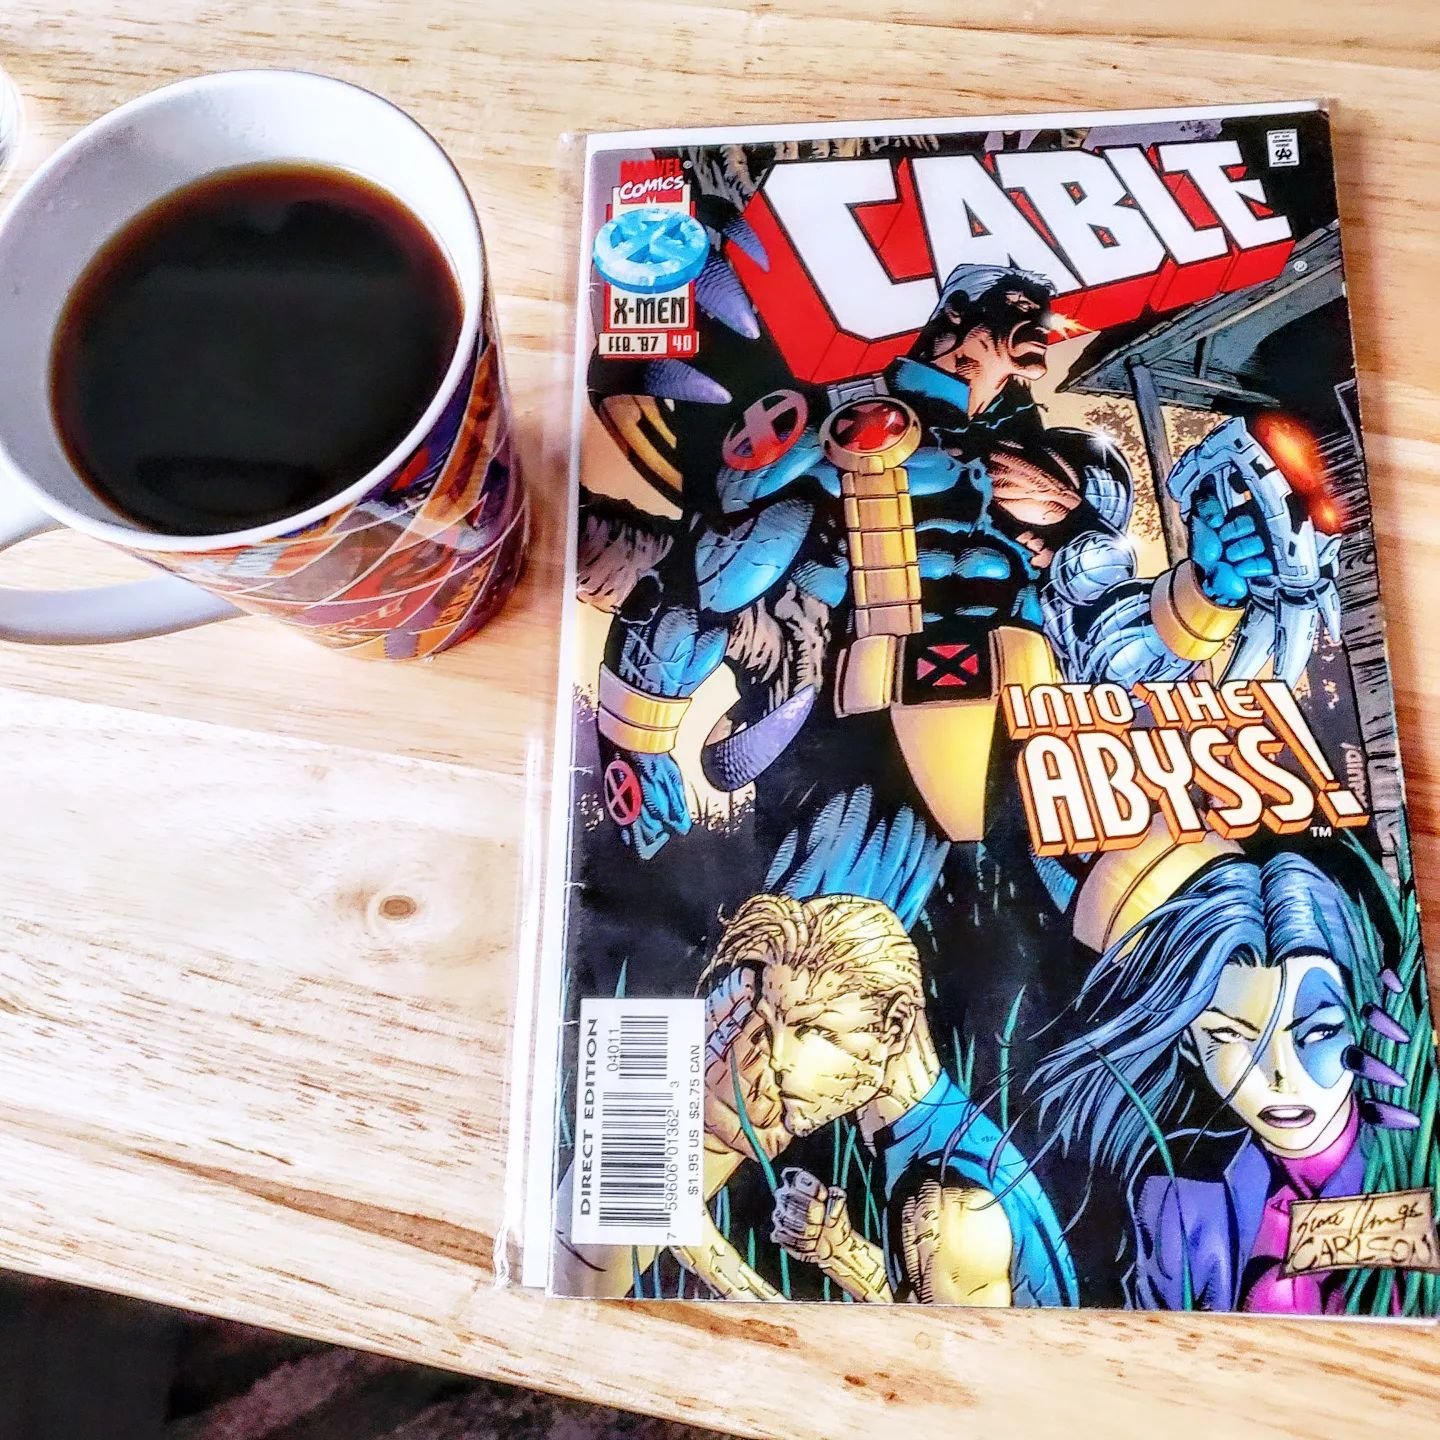 Today's Coffee ☕ and a Comic 📖 is Cable issue 40  written by Todd DeZago with art by Scott Clark and Chris Carlson, Cable and his crew embark on a daring mission to rescue Renee Majcomb from Bastion's ruthless First Strike team